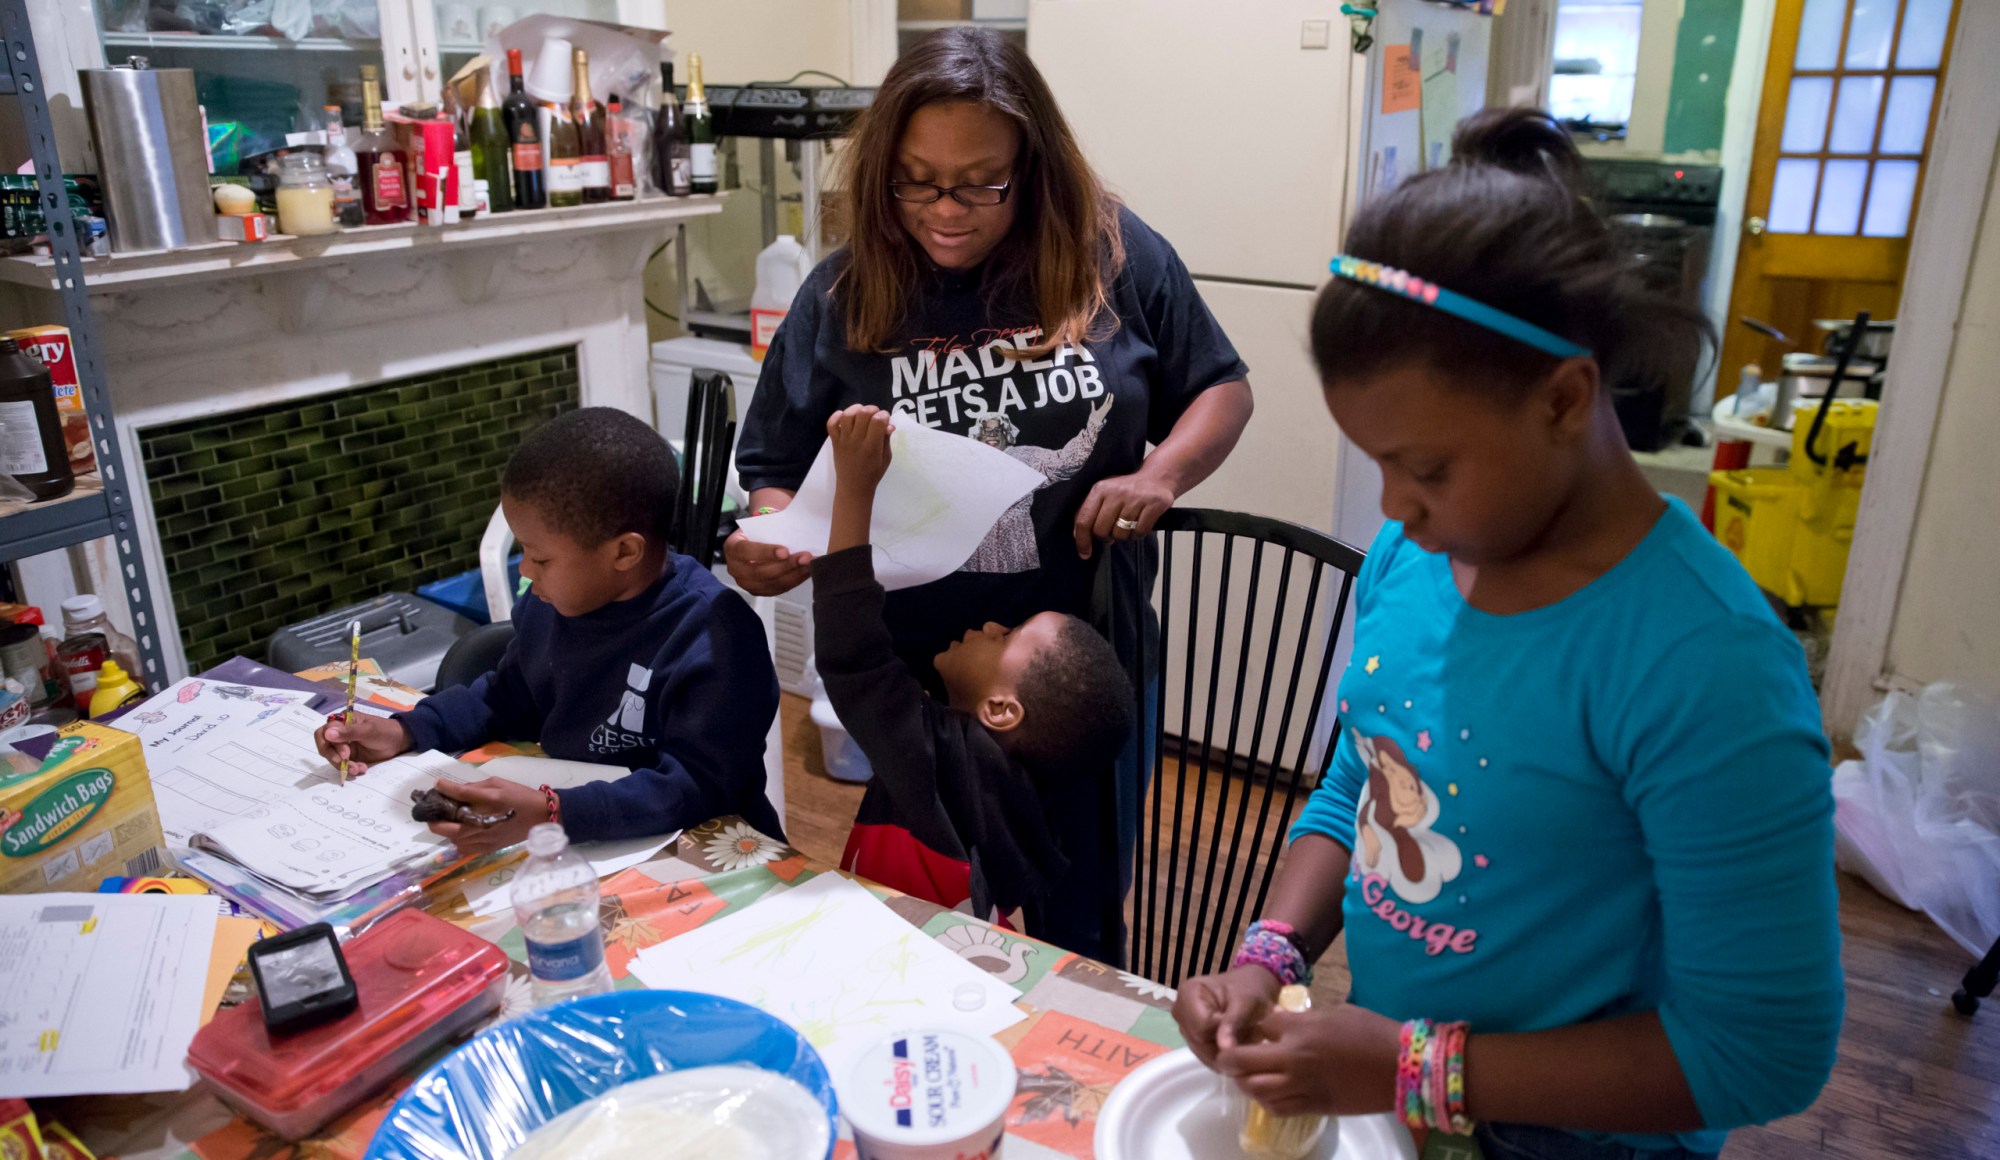 Jennifer Donald of Philadelphia and her three children are one of the many families that will be impacted by cuts to the Supplemental Nutrition Assistance Program. (AP/Matt Rourke)